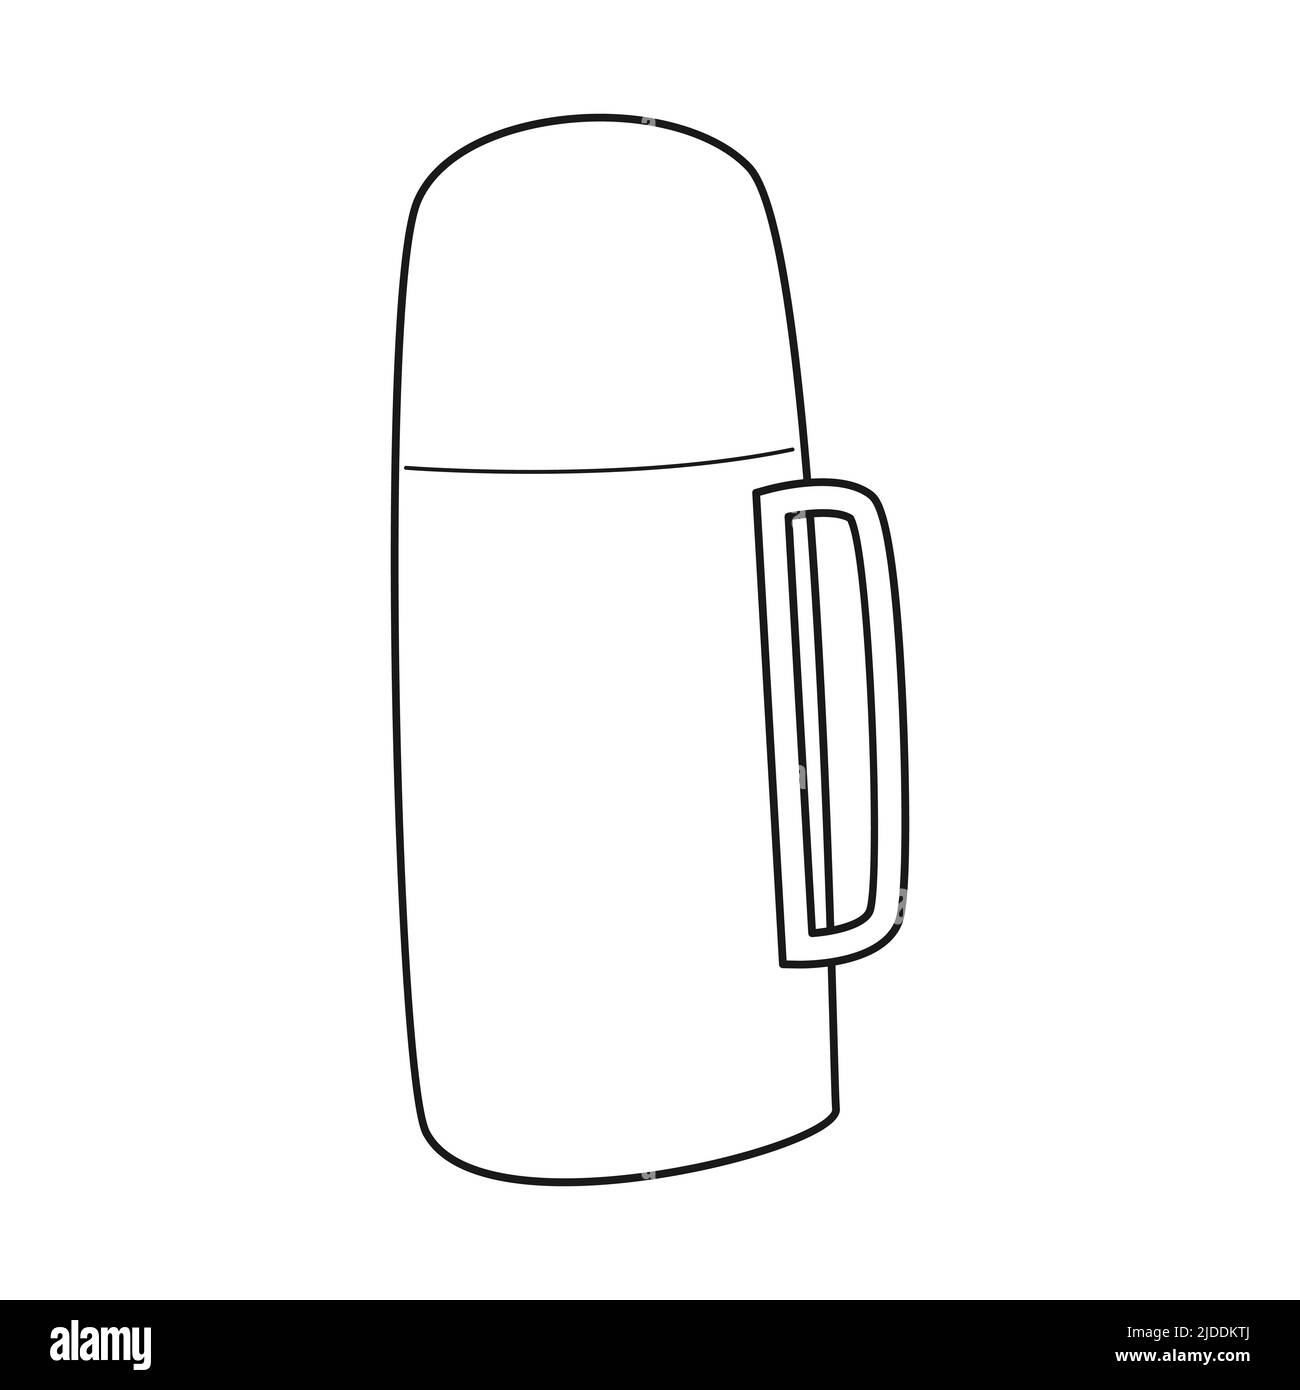 https://c8.alamy.com/comp/2JDDKTJ/doodle-thermos-thermocup-equipment-for-tourism-camping-travel-hiking-outline-black-and-white-vector-illustration-isolated-on-a-white-background-2JDDKTJ.jpg